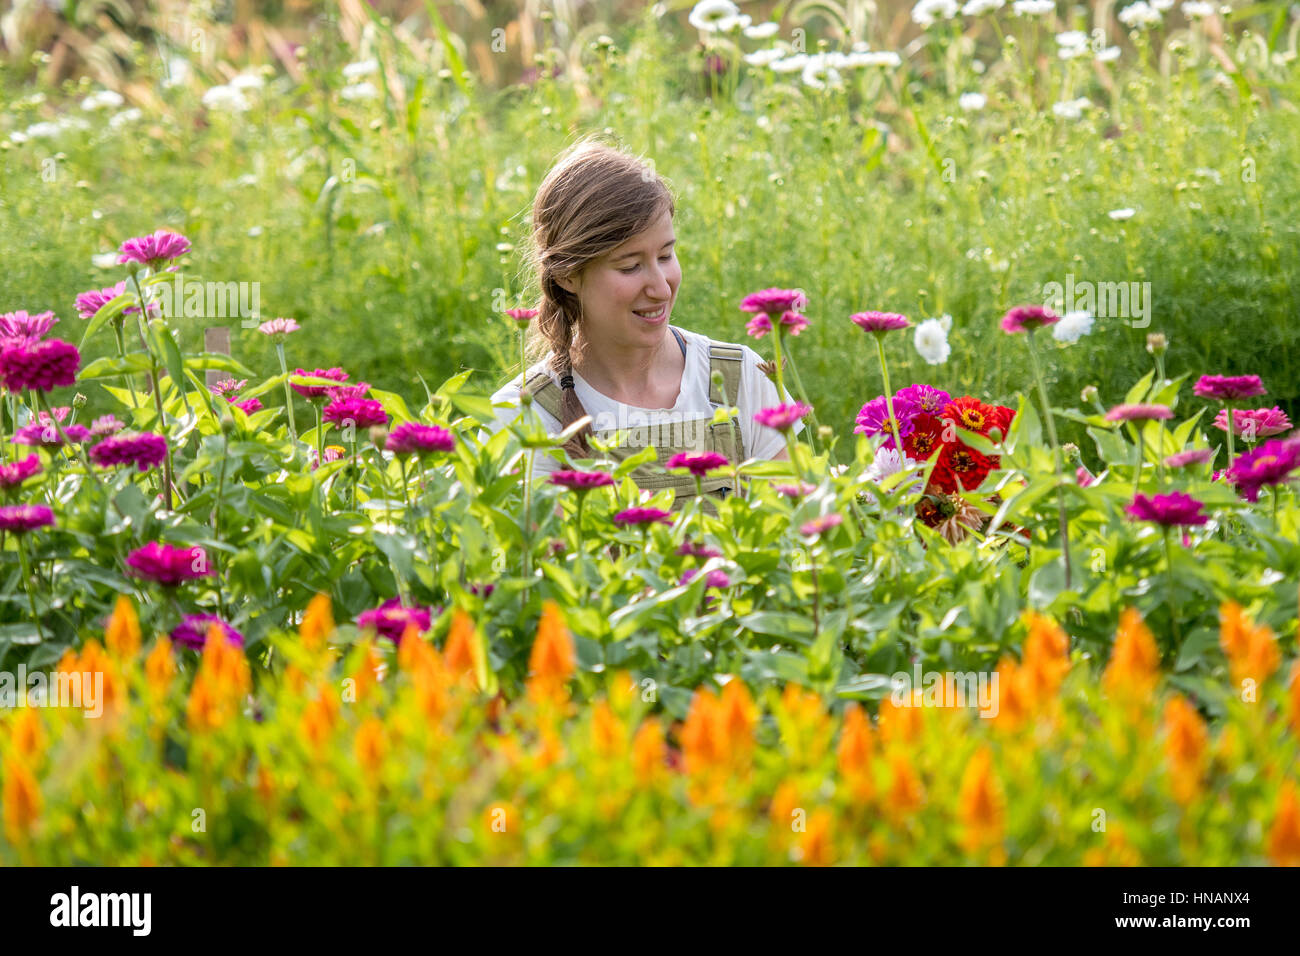 Woman picking flowers from a garden on a farm in rural Maryland. Stock Photo